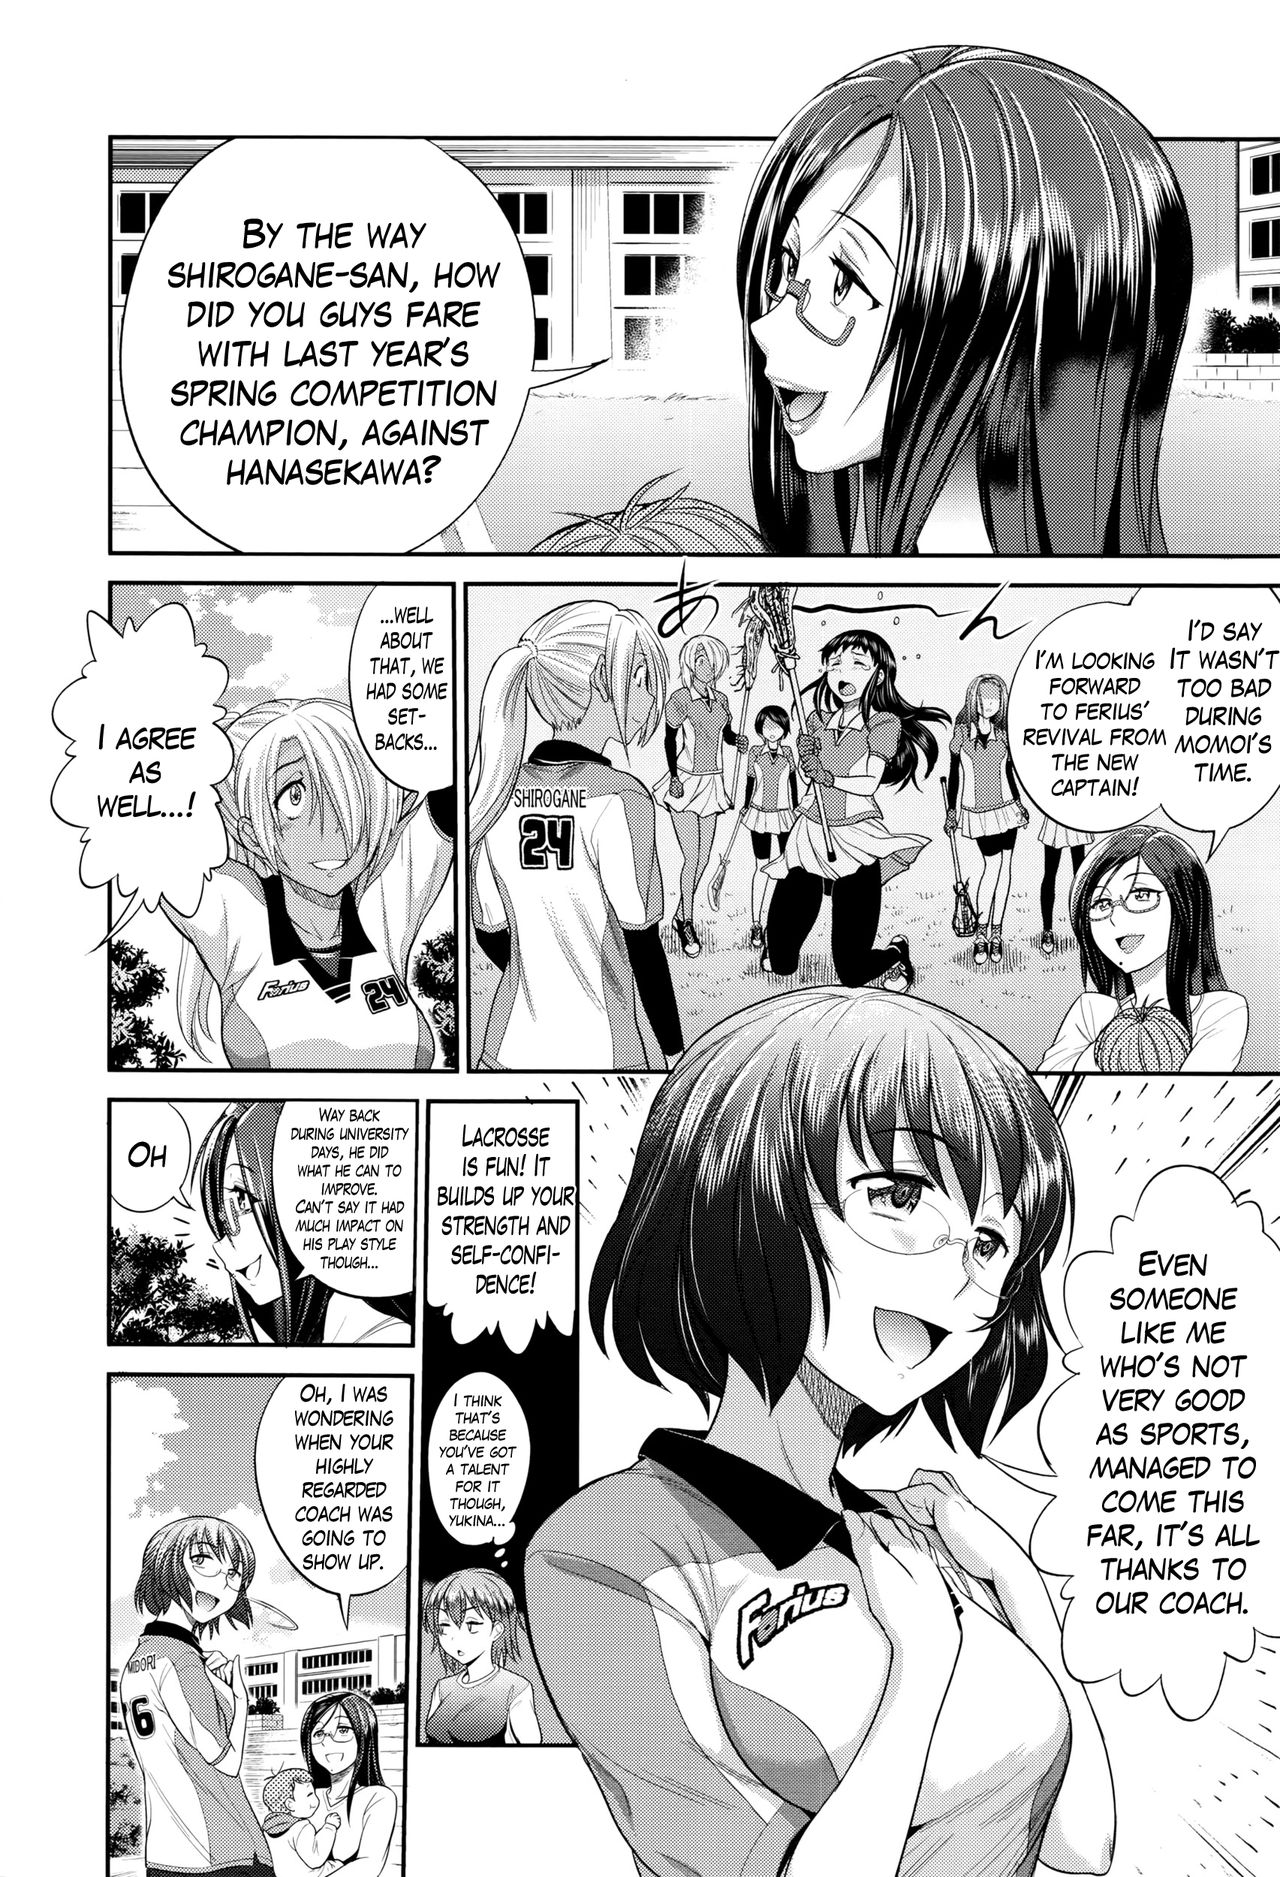 [DISTANCE] Joshi Lacu! - Girls Lacrosse Club ~2 Years Later~ Ch. 0 (COMIC ExE 01) [English] [TripleSevenScans] [DISTANCE] じょしラク！～2Years Later～ 第0話 (コミック エグゼ 01) [英訳]